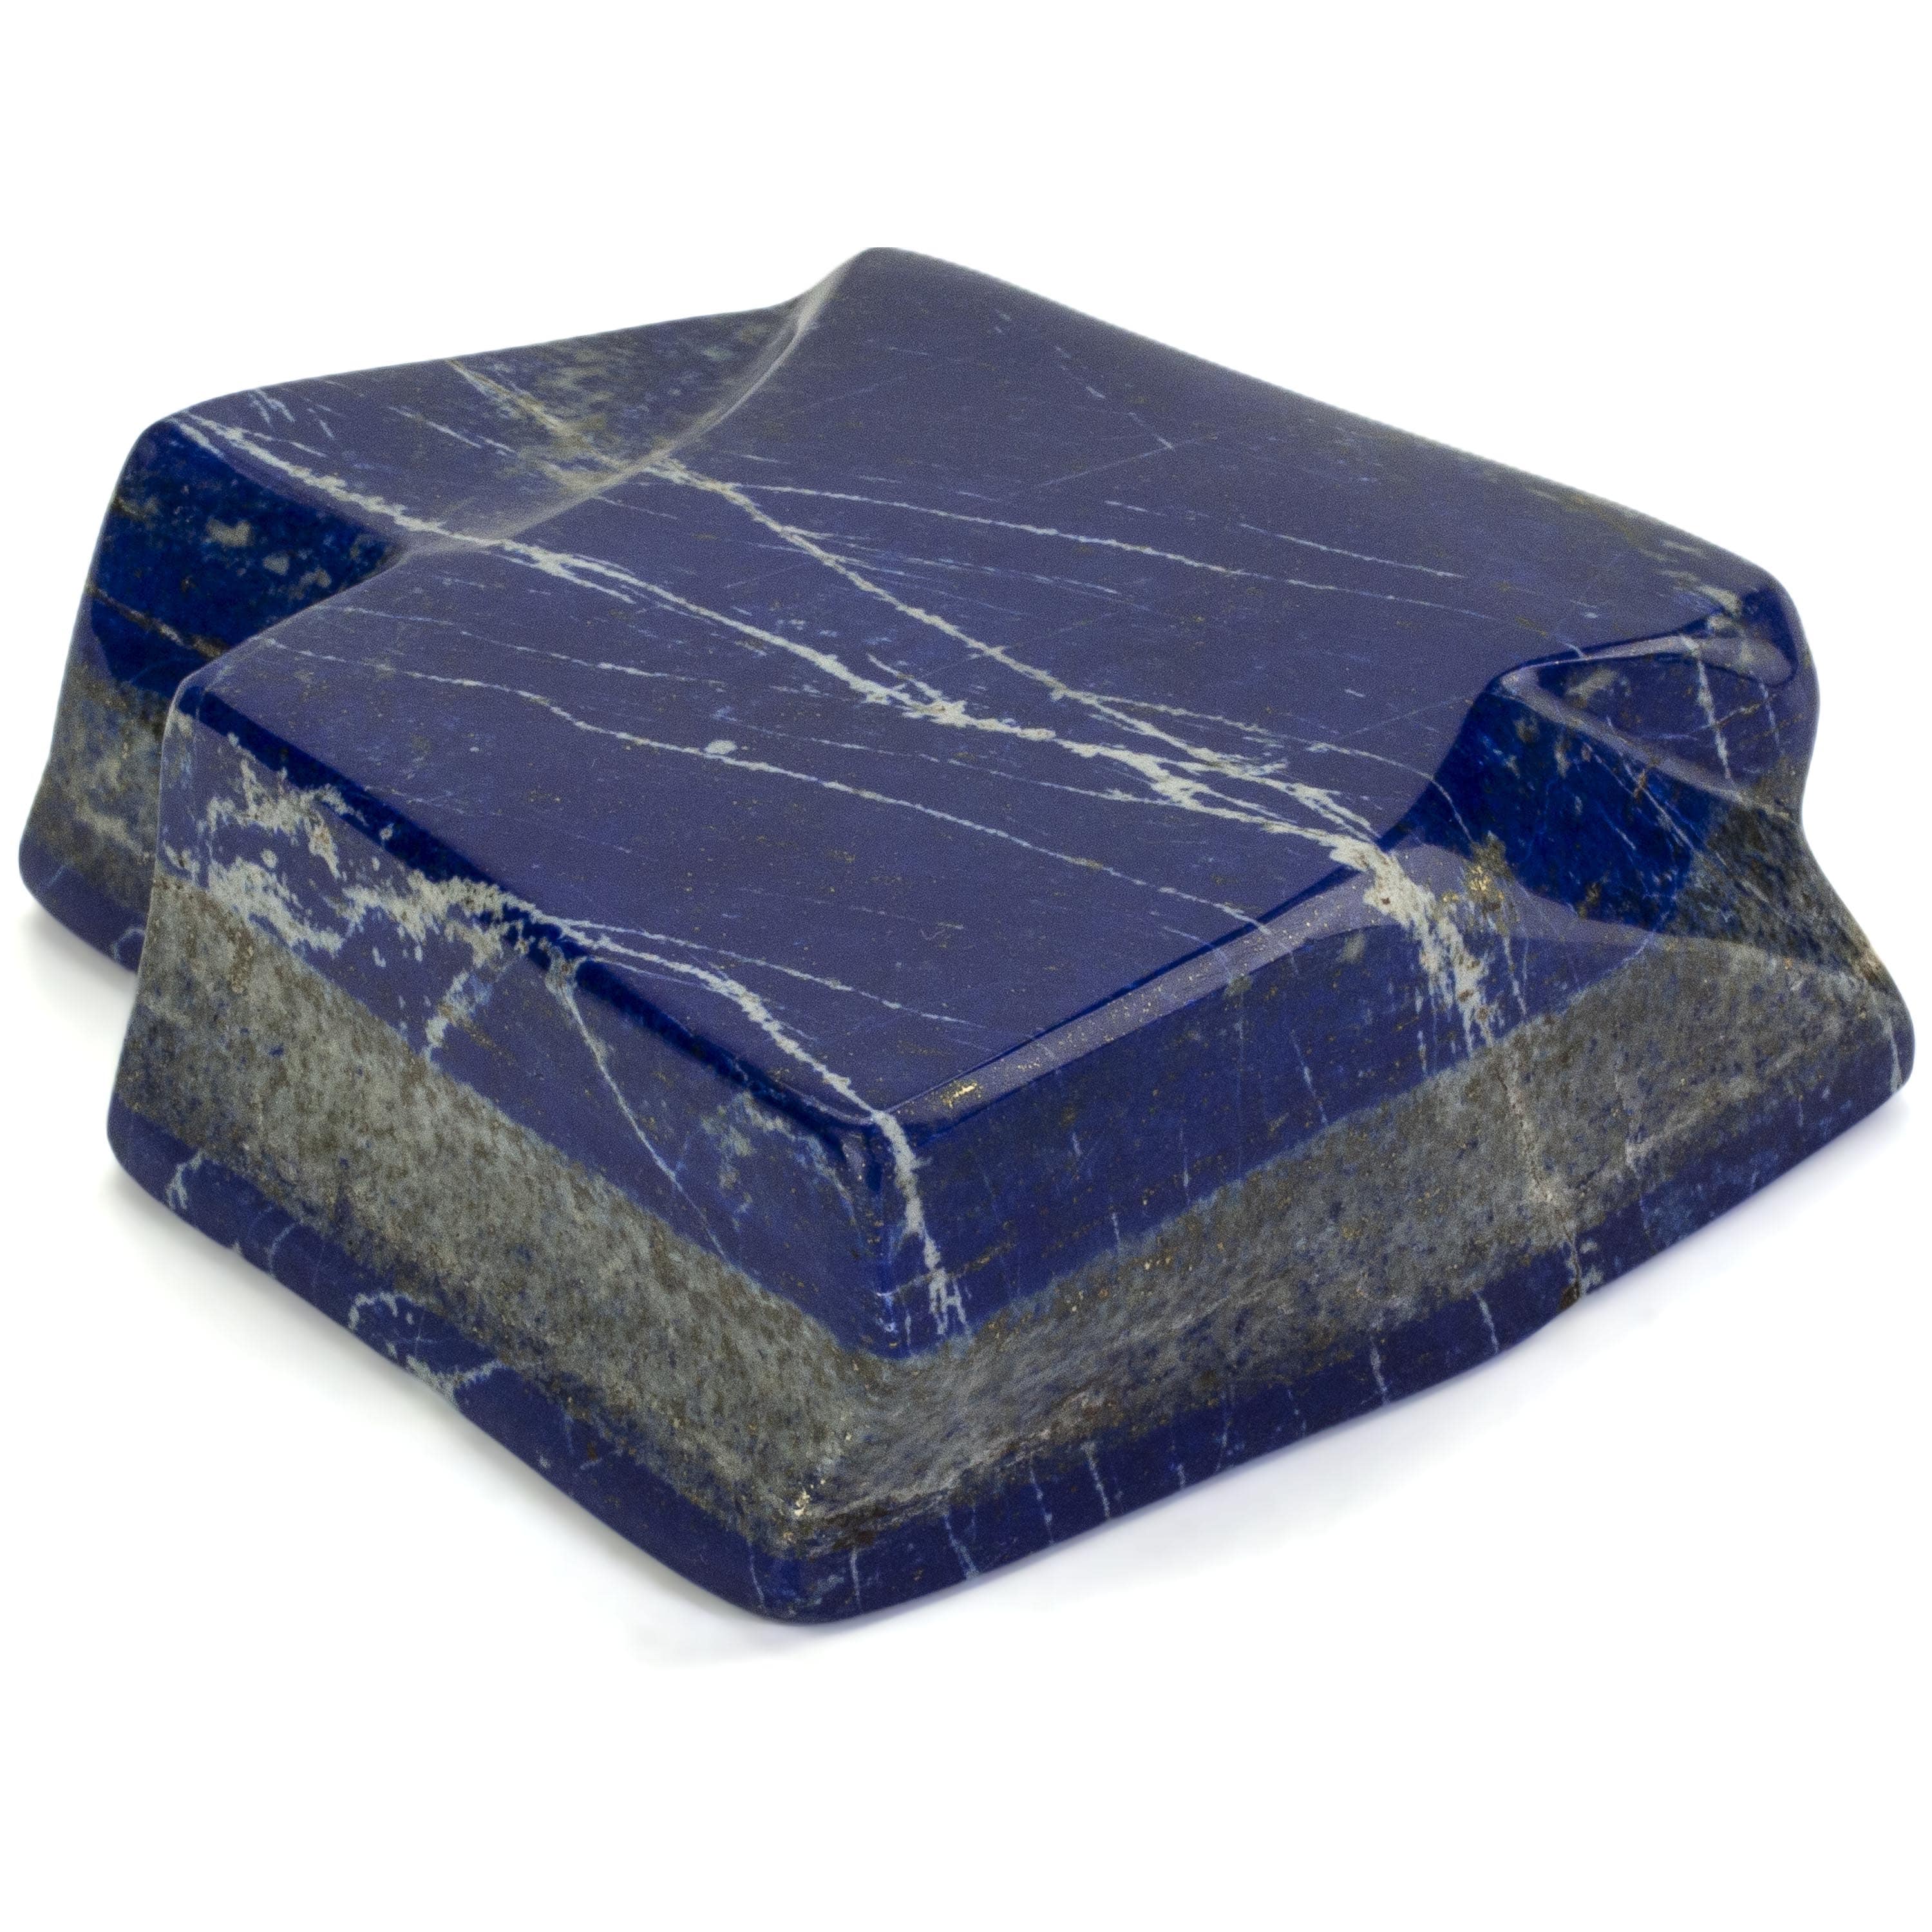 Kalifano Lapis Lapis Lazuil Freeform from Afghanistan - 1.3 kg / 2.8 lbs LP1400.002